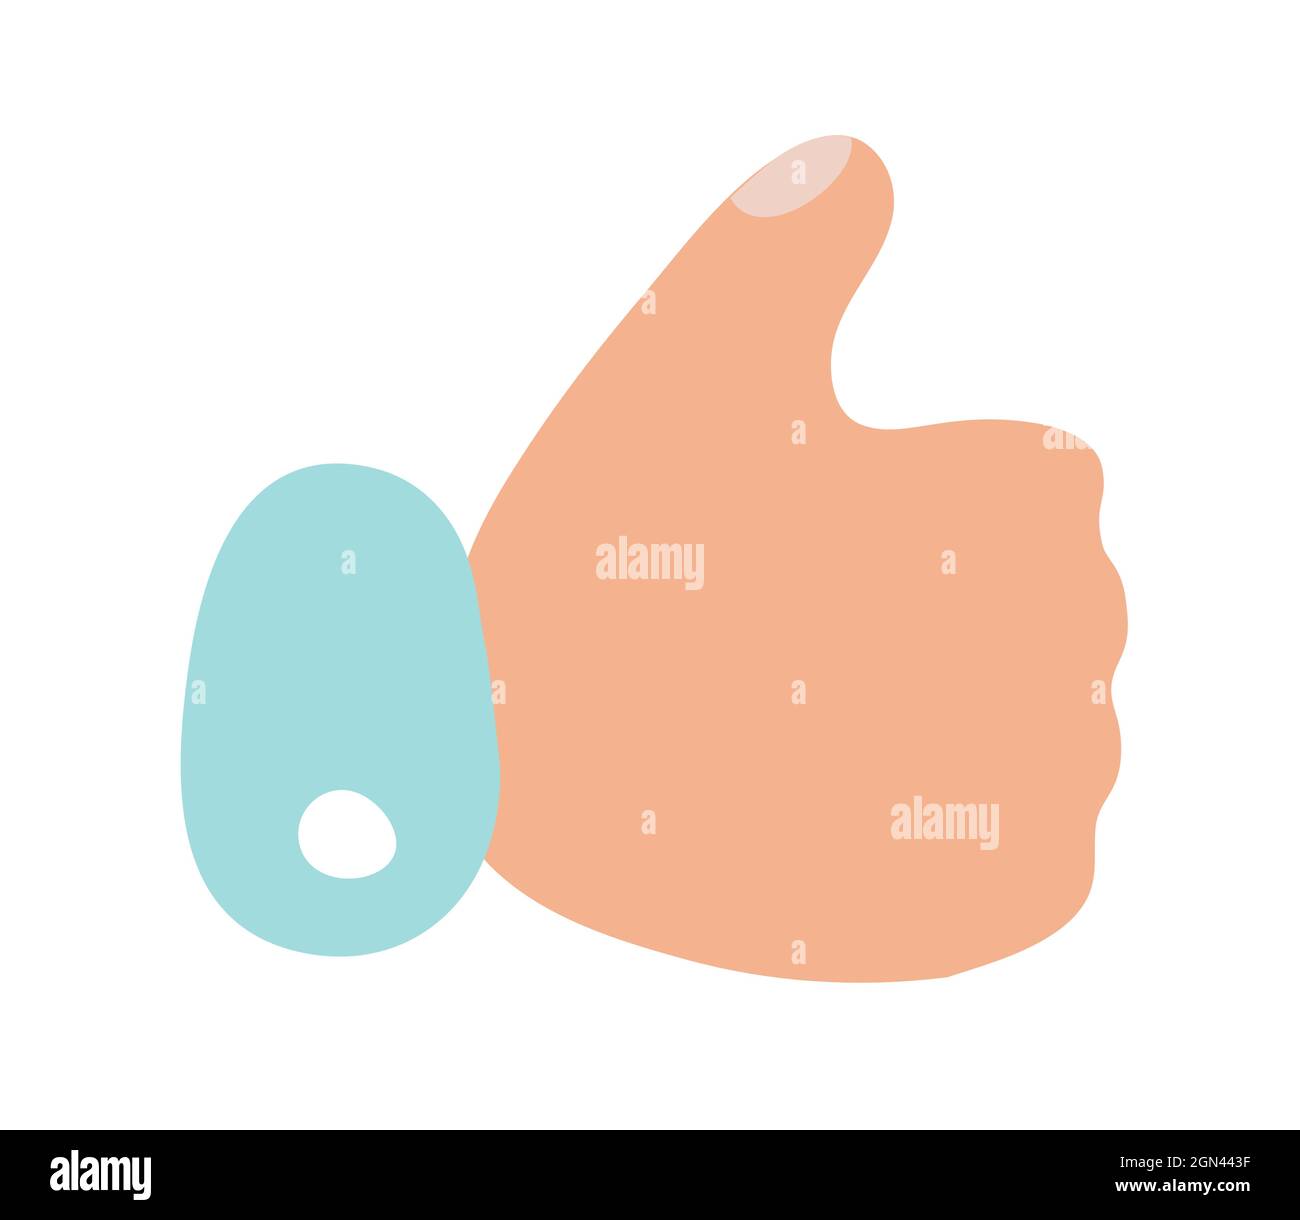 Doodle thumbs up icon or logo in trendy naive style Stock Vector